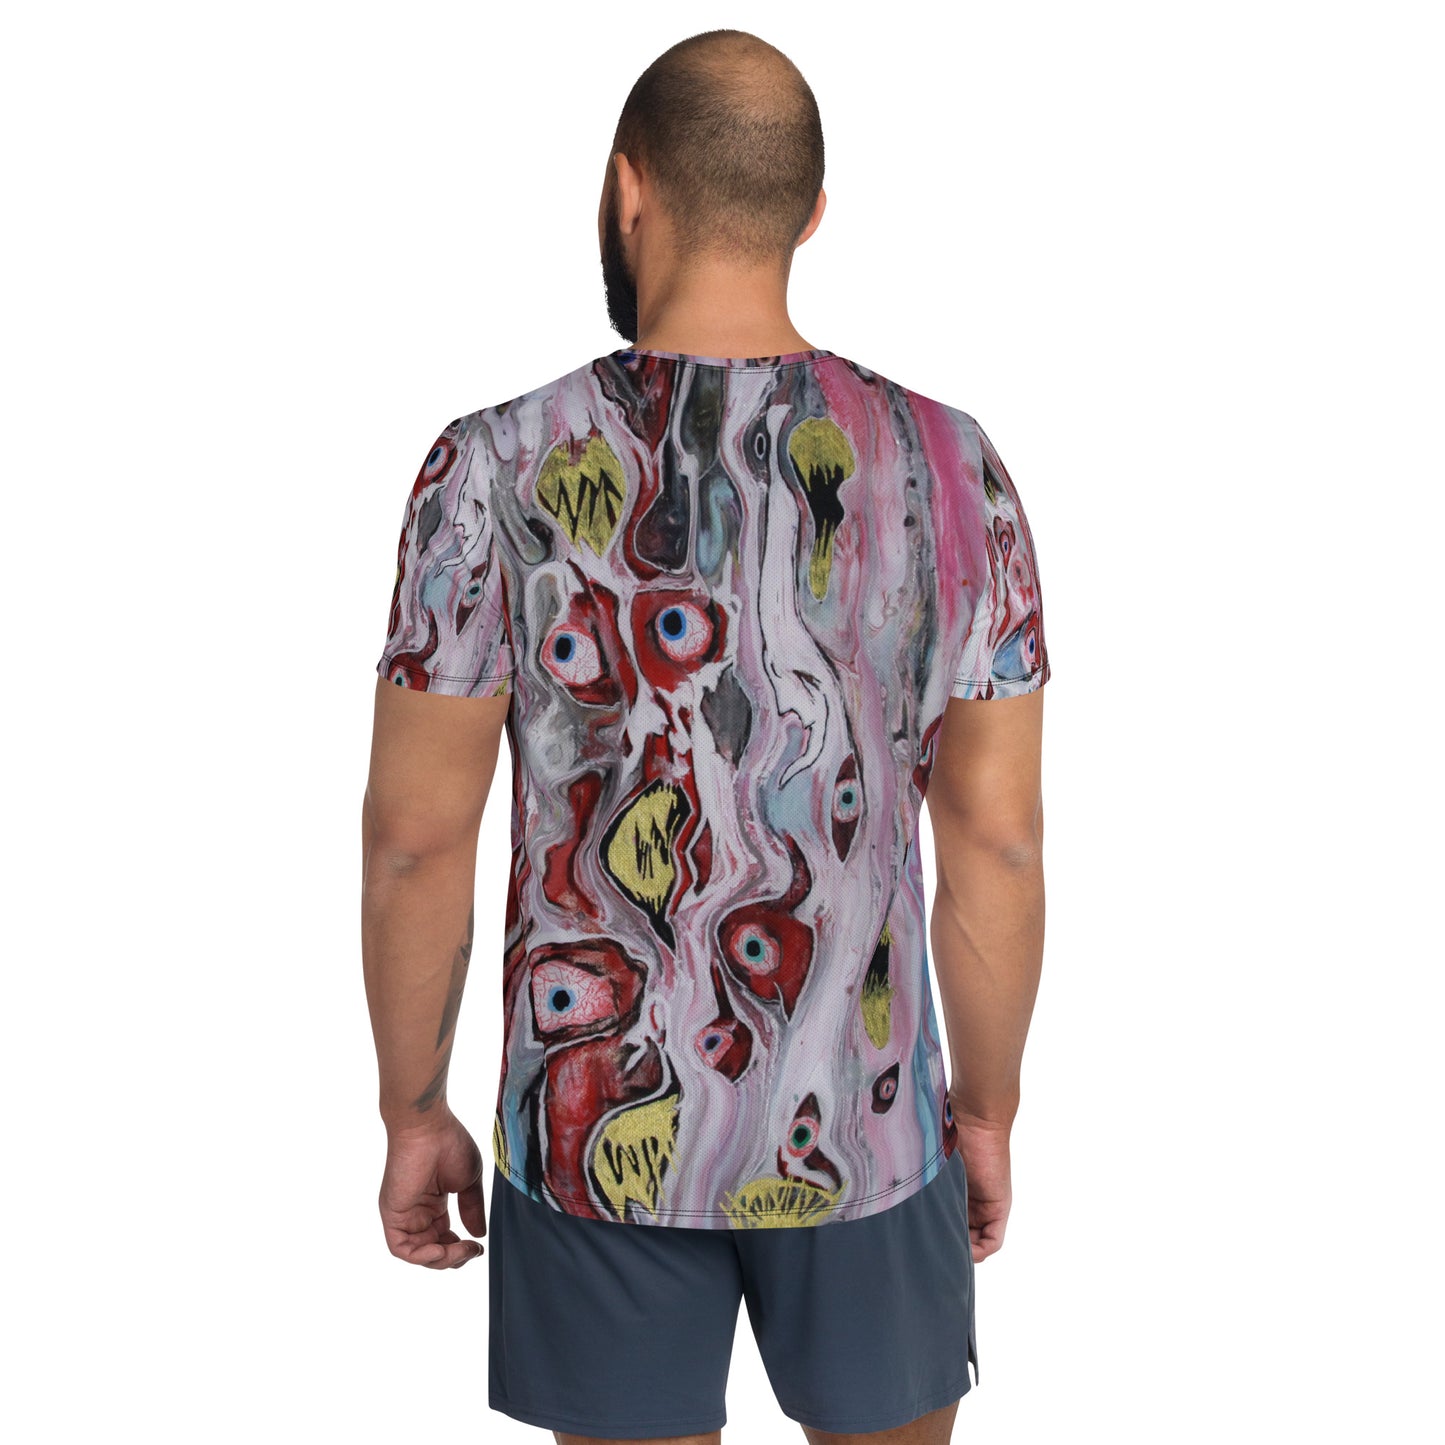 Shirt (Athletic T-shirt) - MONSTER FACES